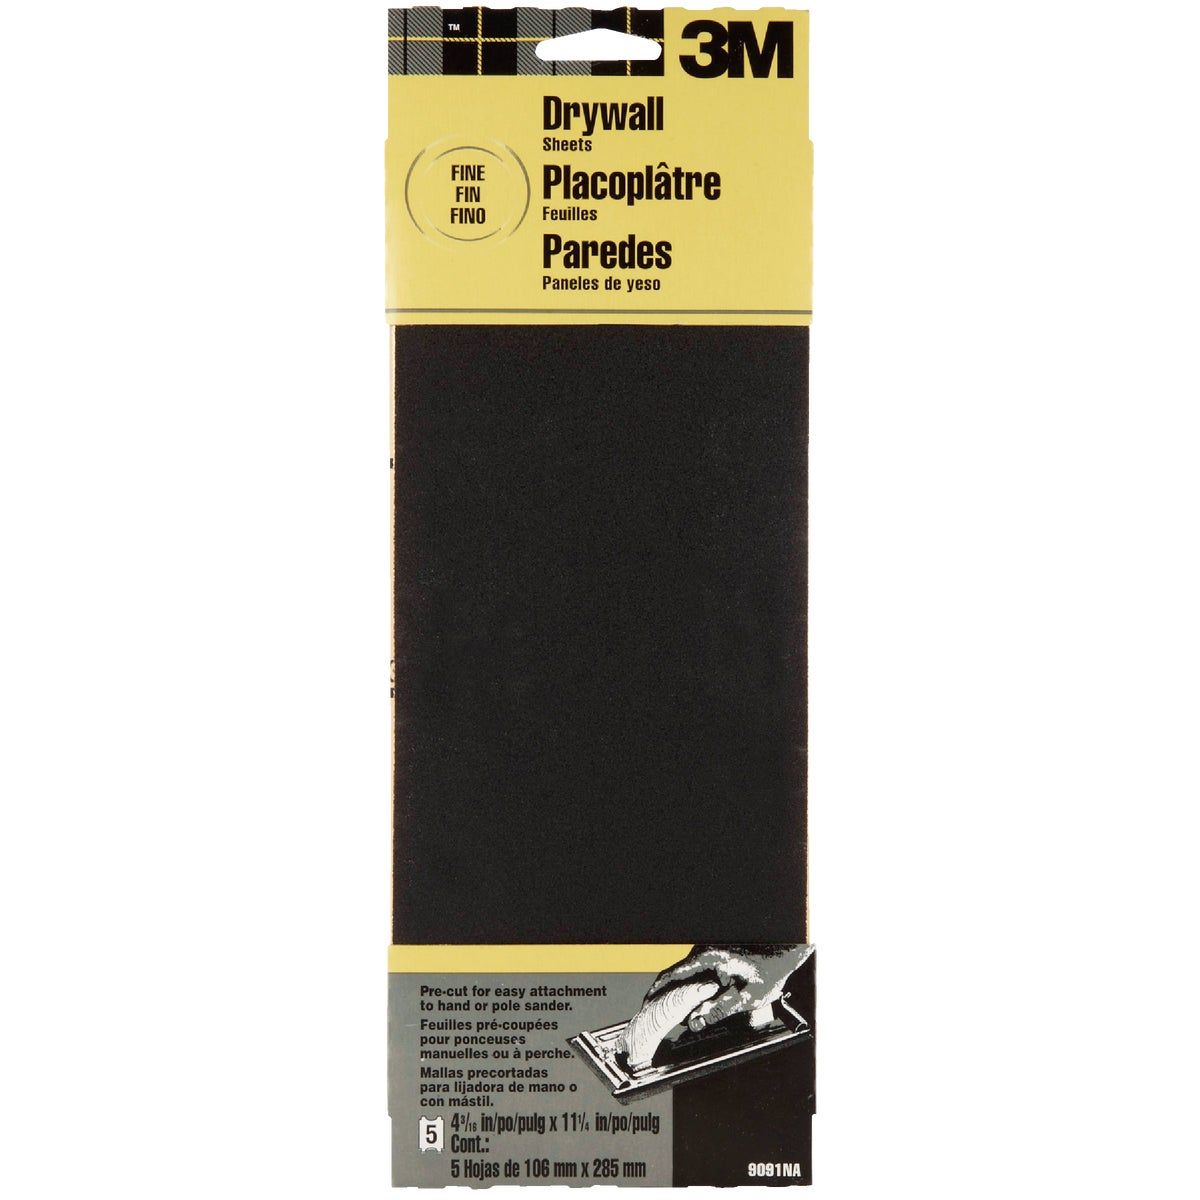 Item 322784, 3M Drywall sanding sheets are designed for sanding drywall joint compounds